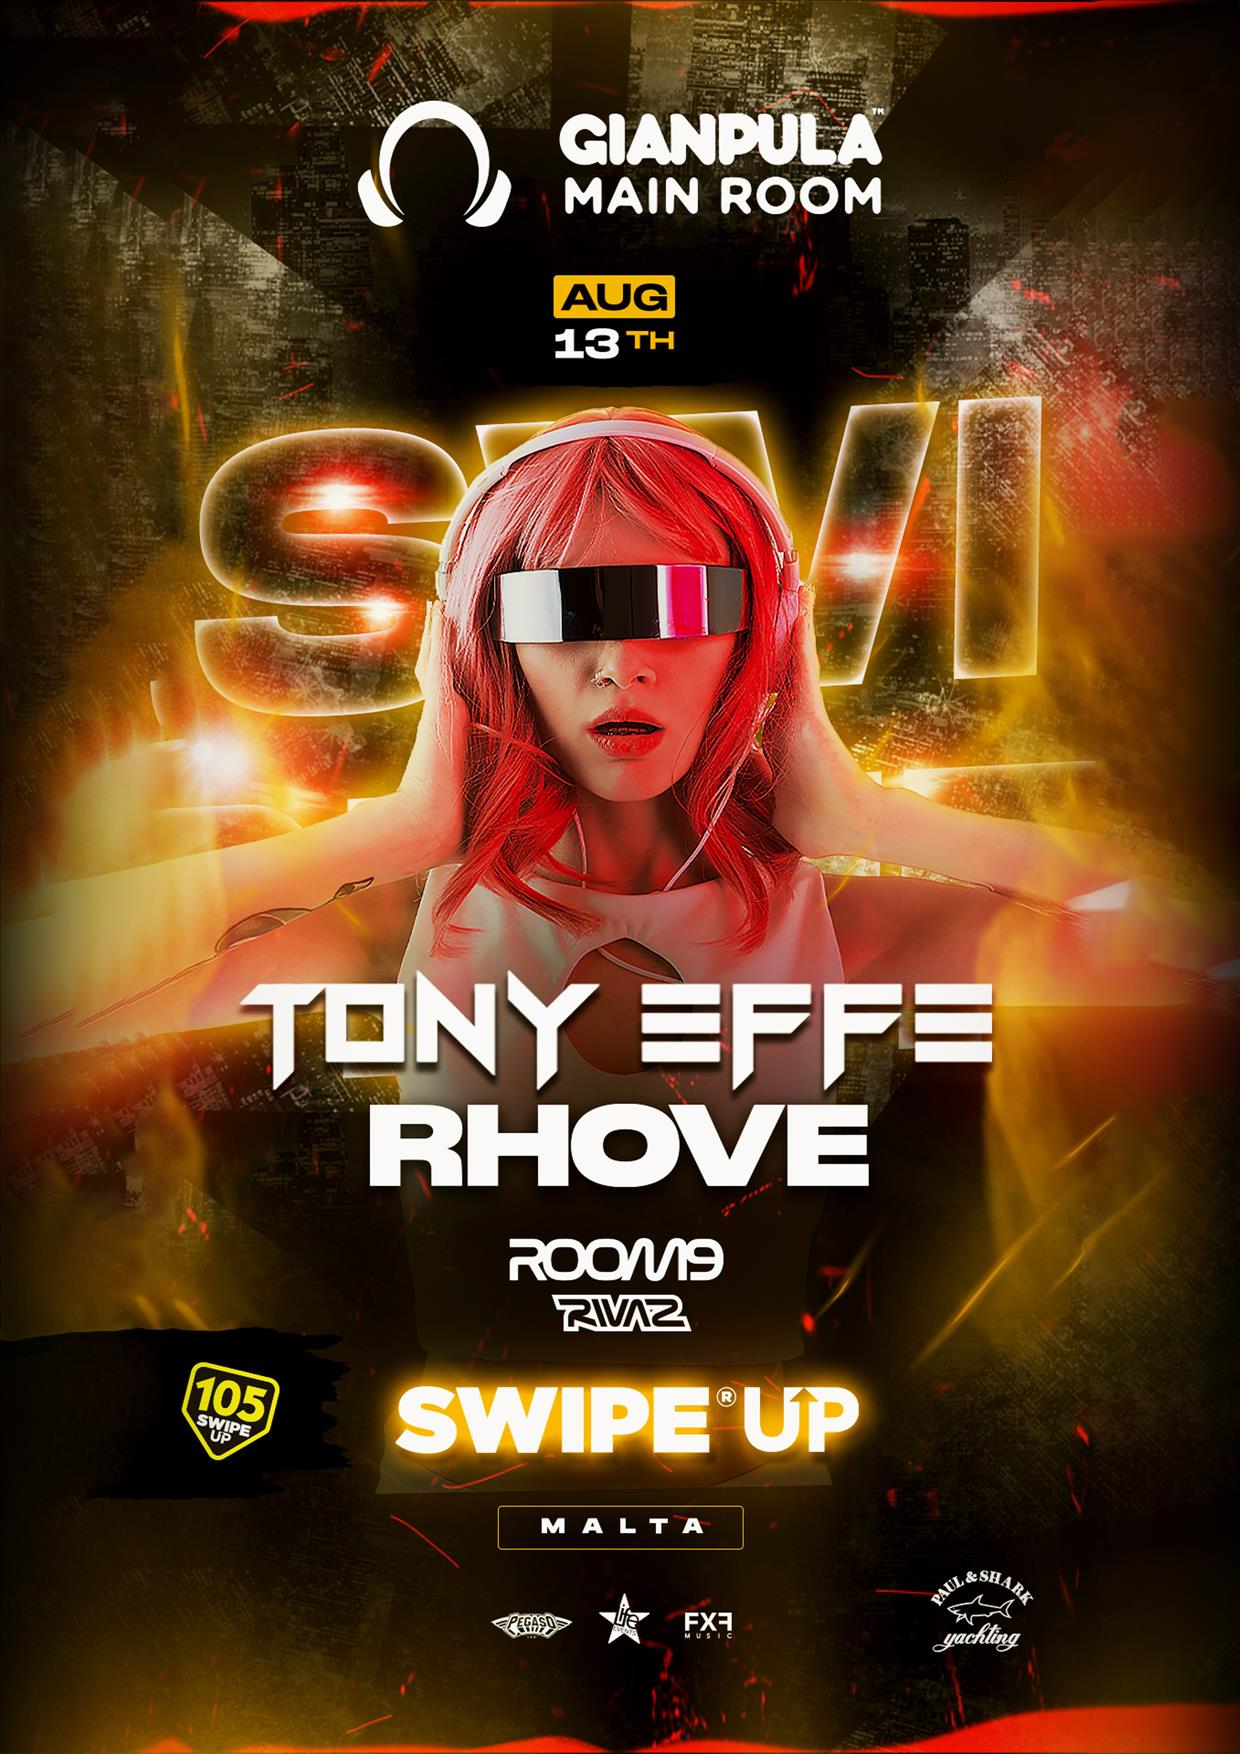 105 Swipe Up Live in Malta at Gianpula Mainroom Ft. Tony Effe | Rhove | Room9 | Rivaz poster